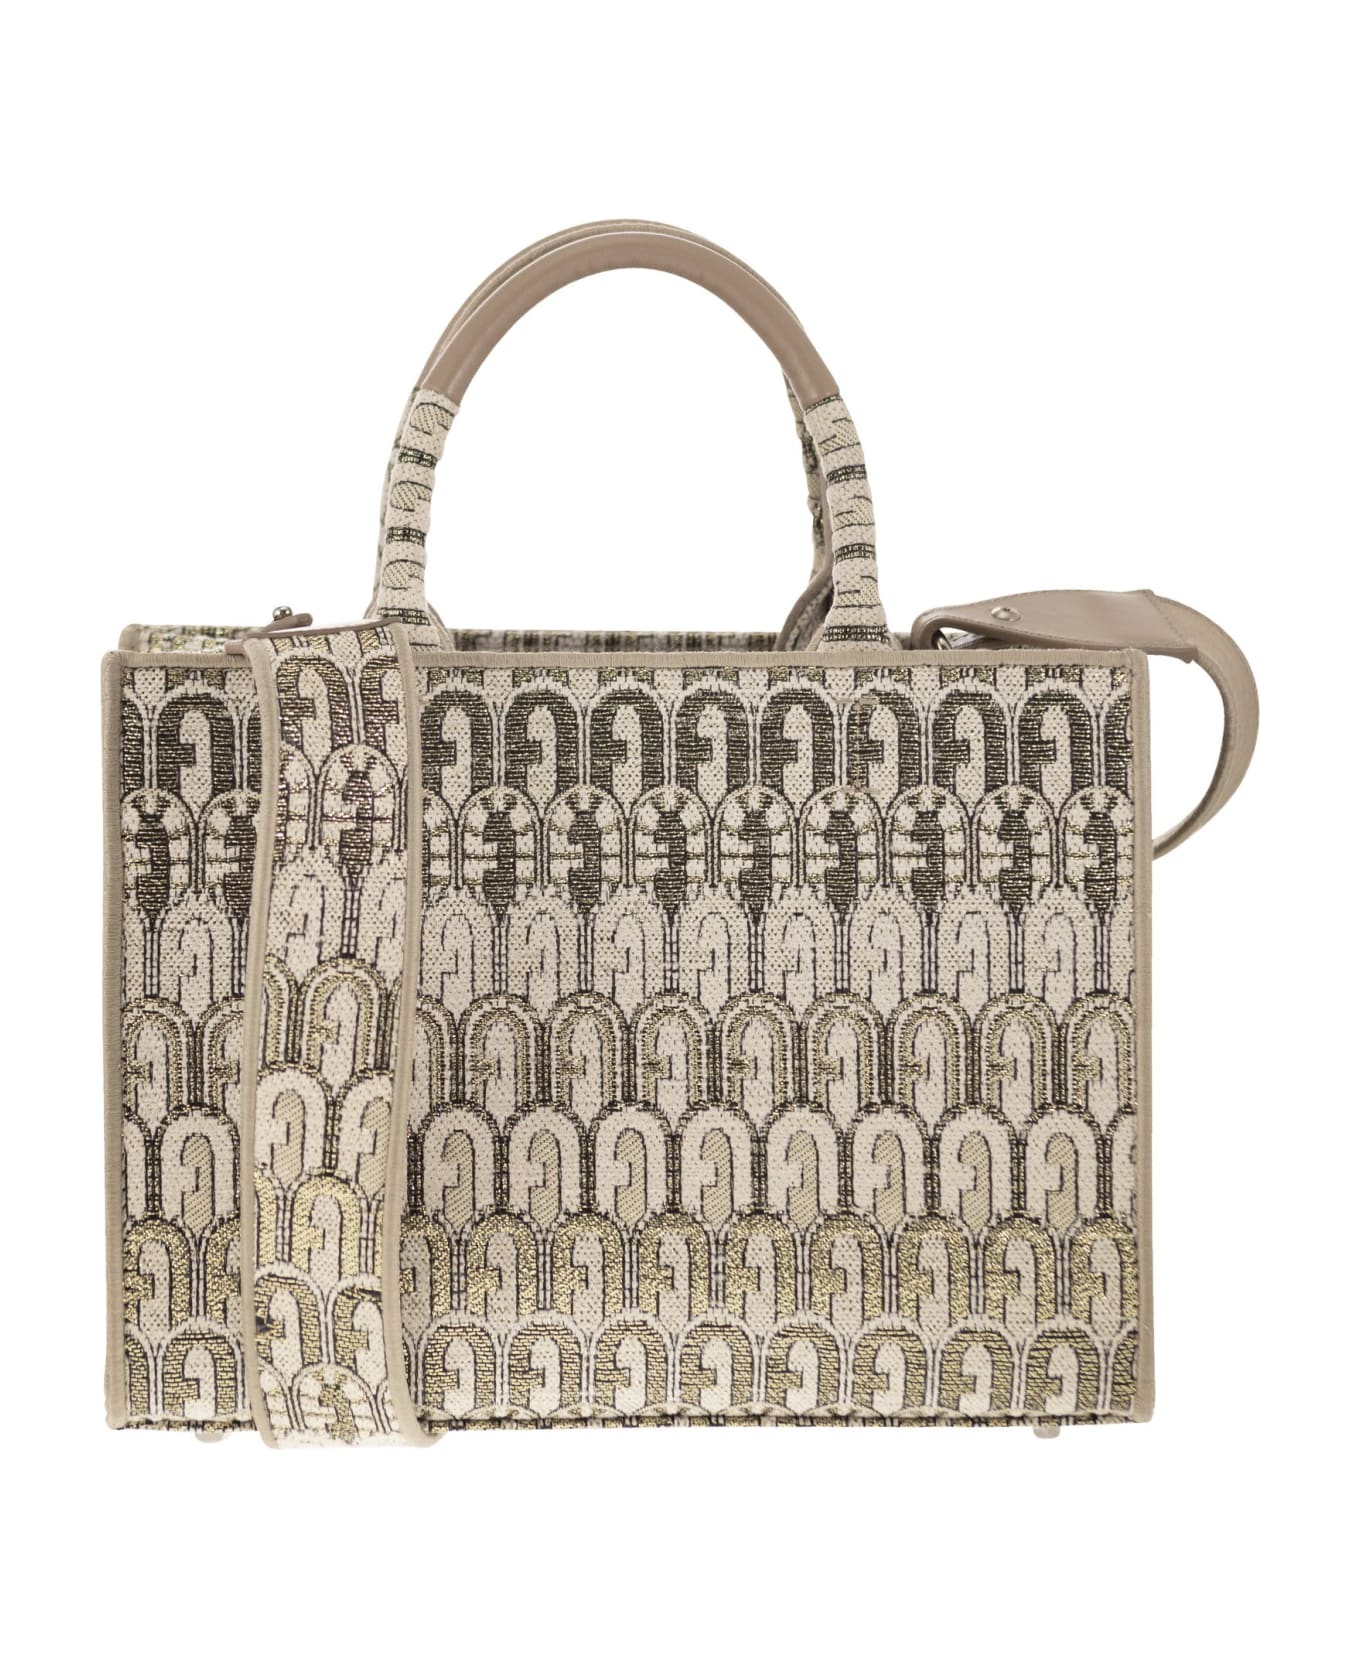 Furla Opportunity - Tote Bag Small - Beige